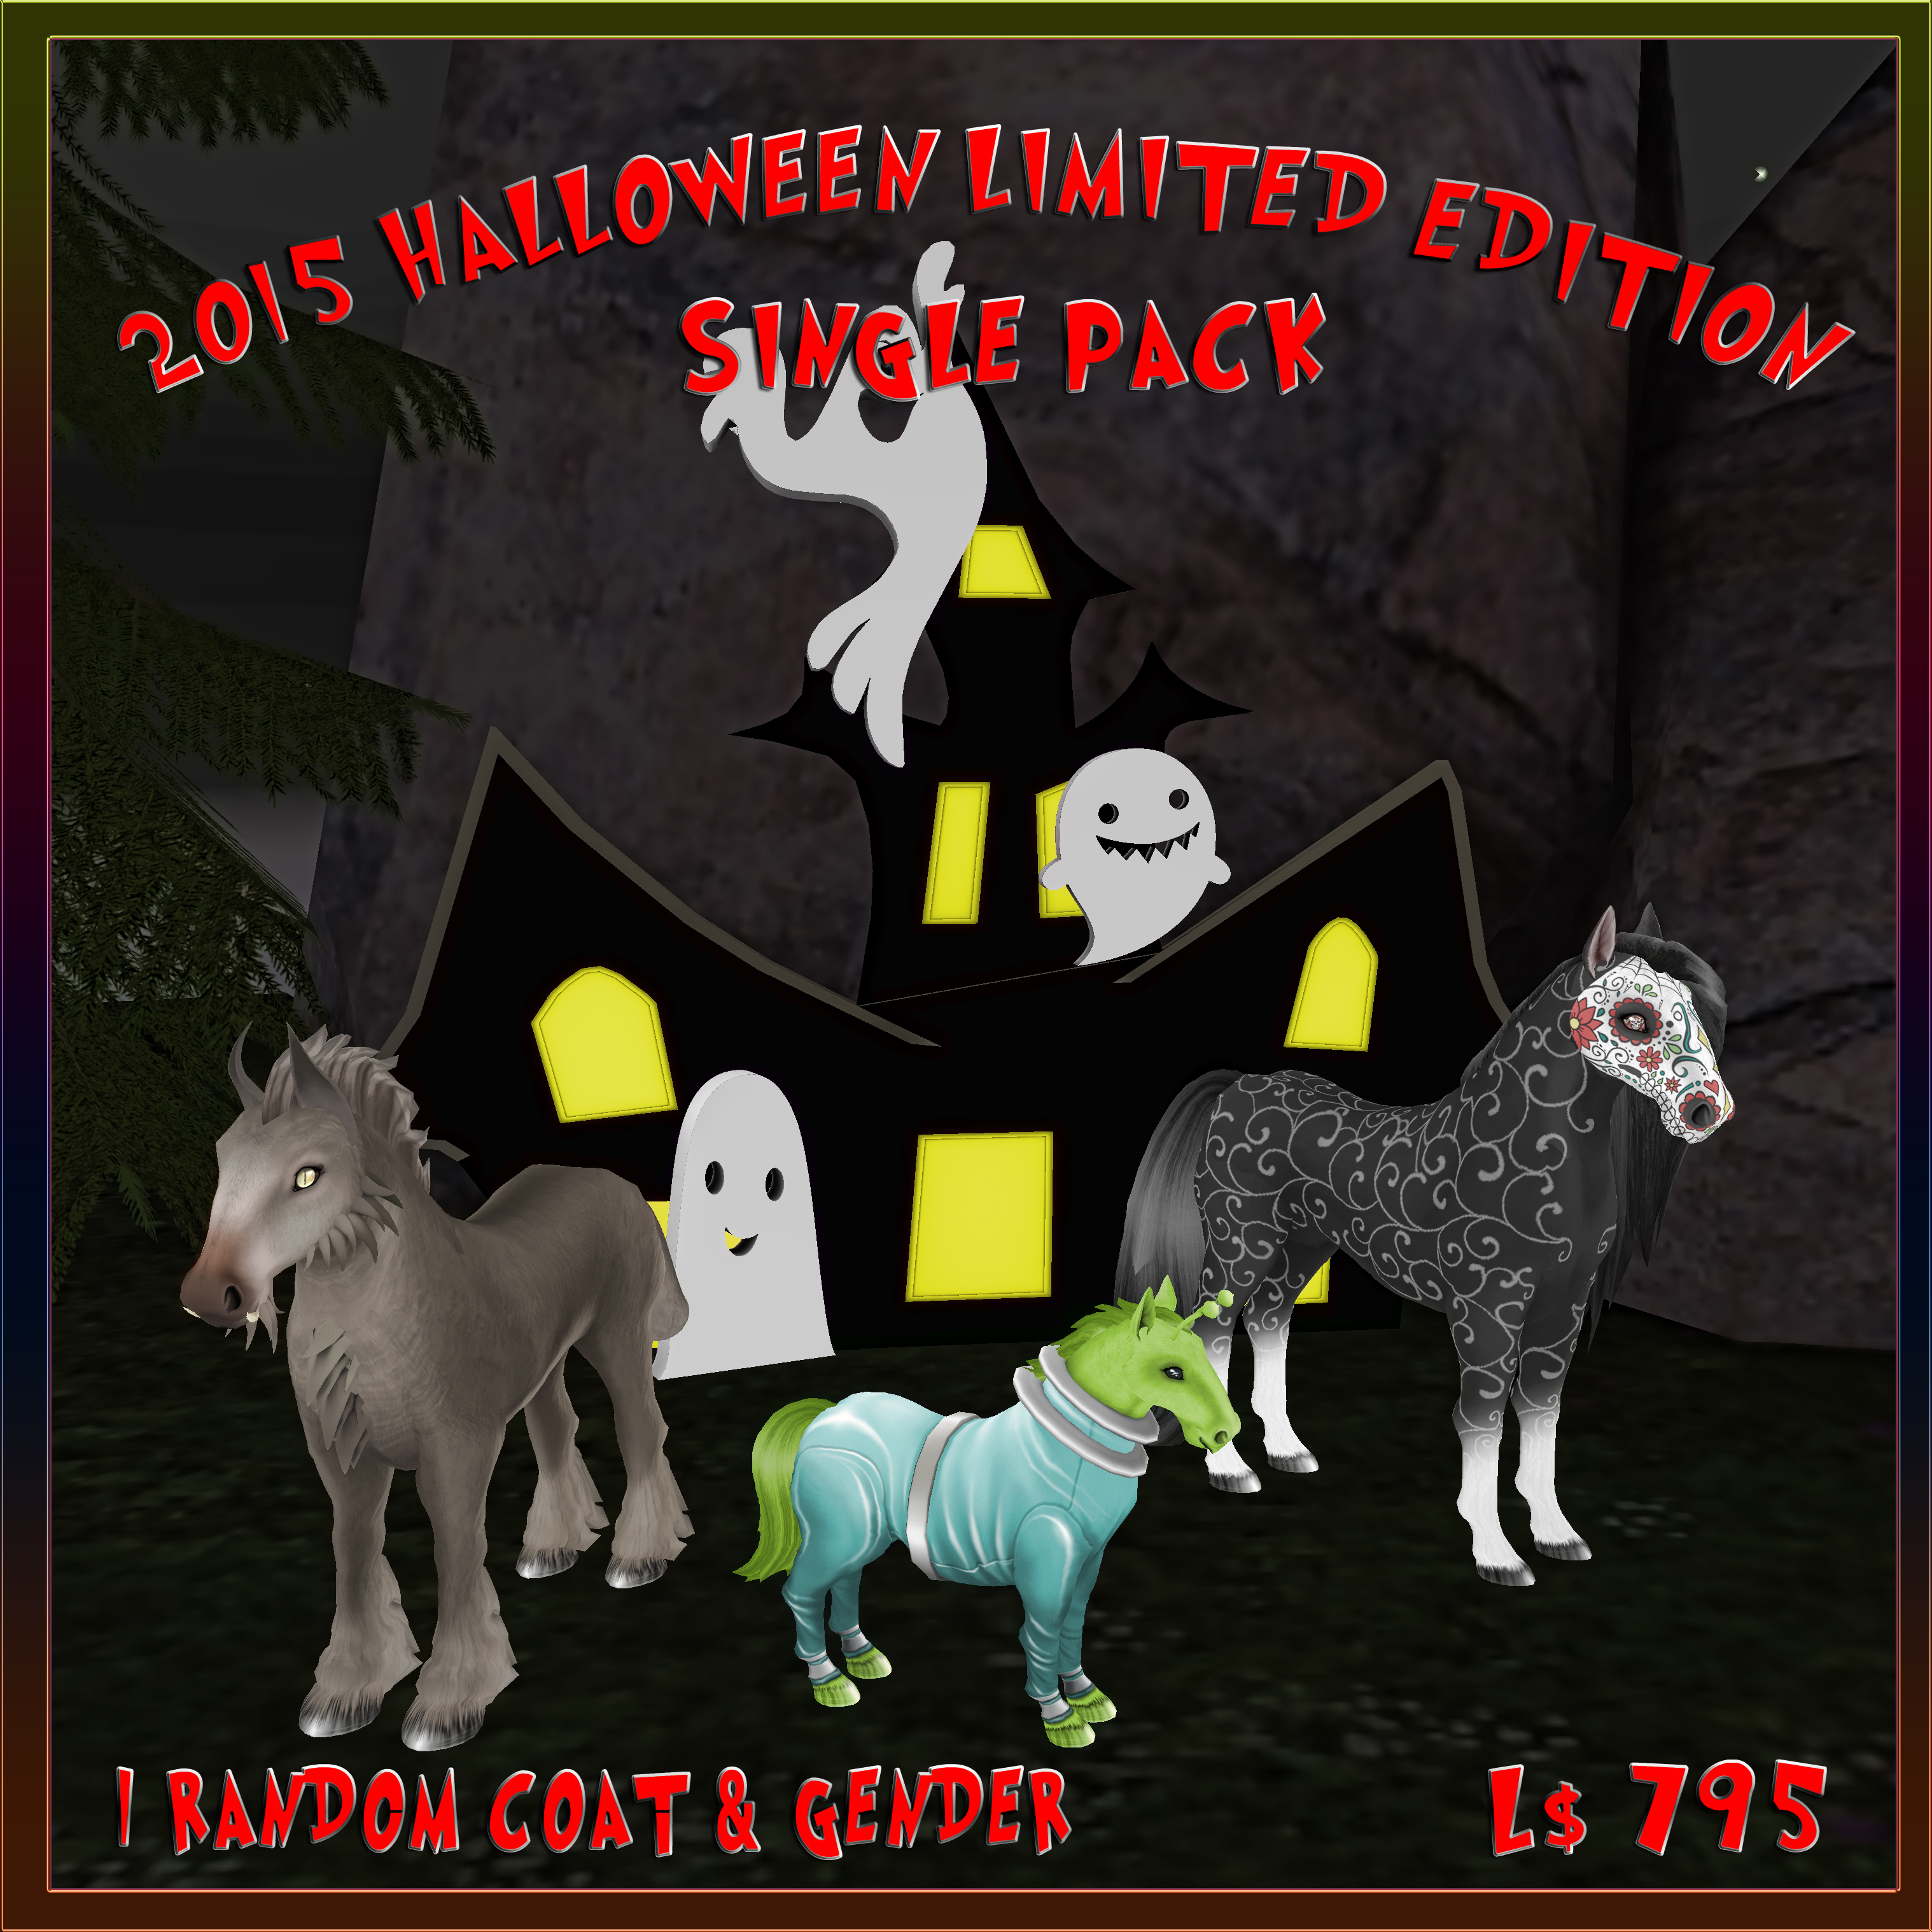 2015 Halloween Limited Edition - Single Pack